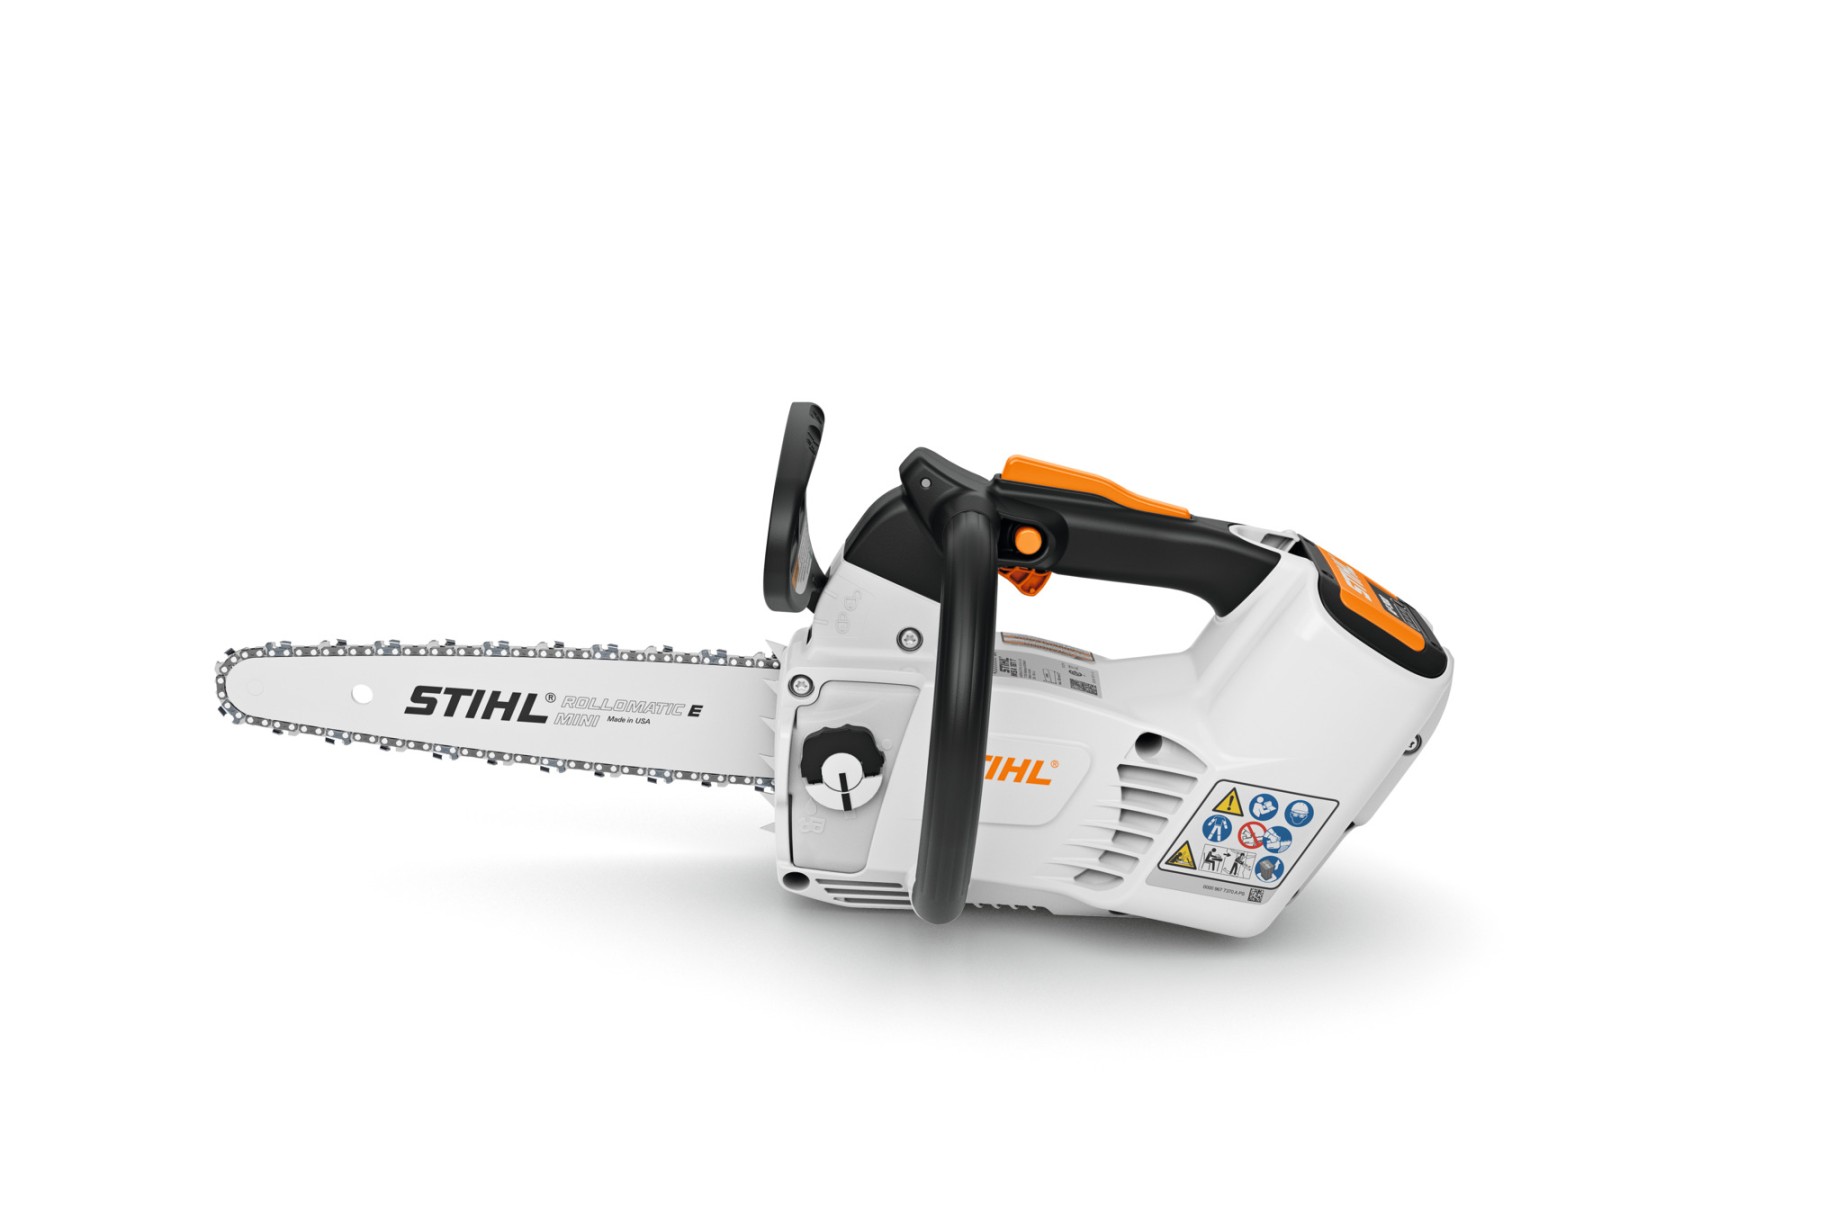 msa-t-battery-chainsaw-ap-system Stihl Top Handle Battery Chainsaw Review: Cutting Through The Hype picture